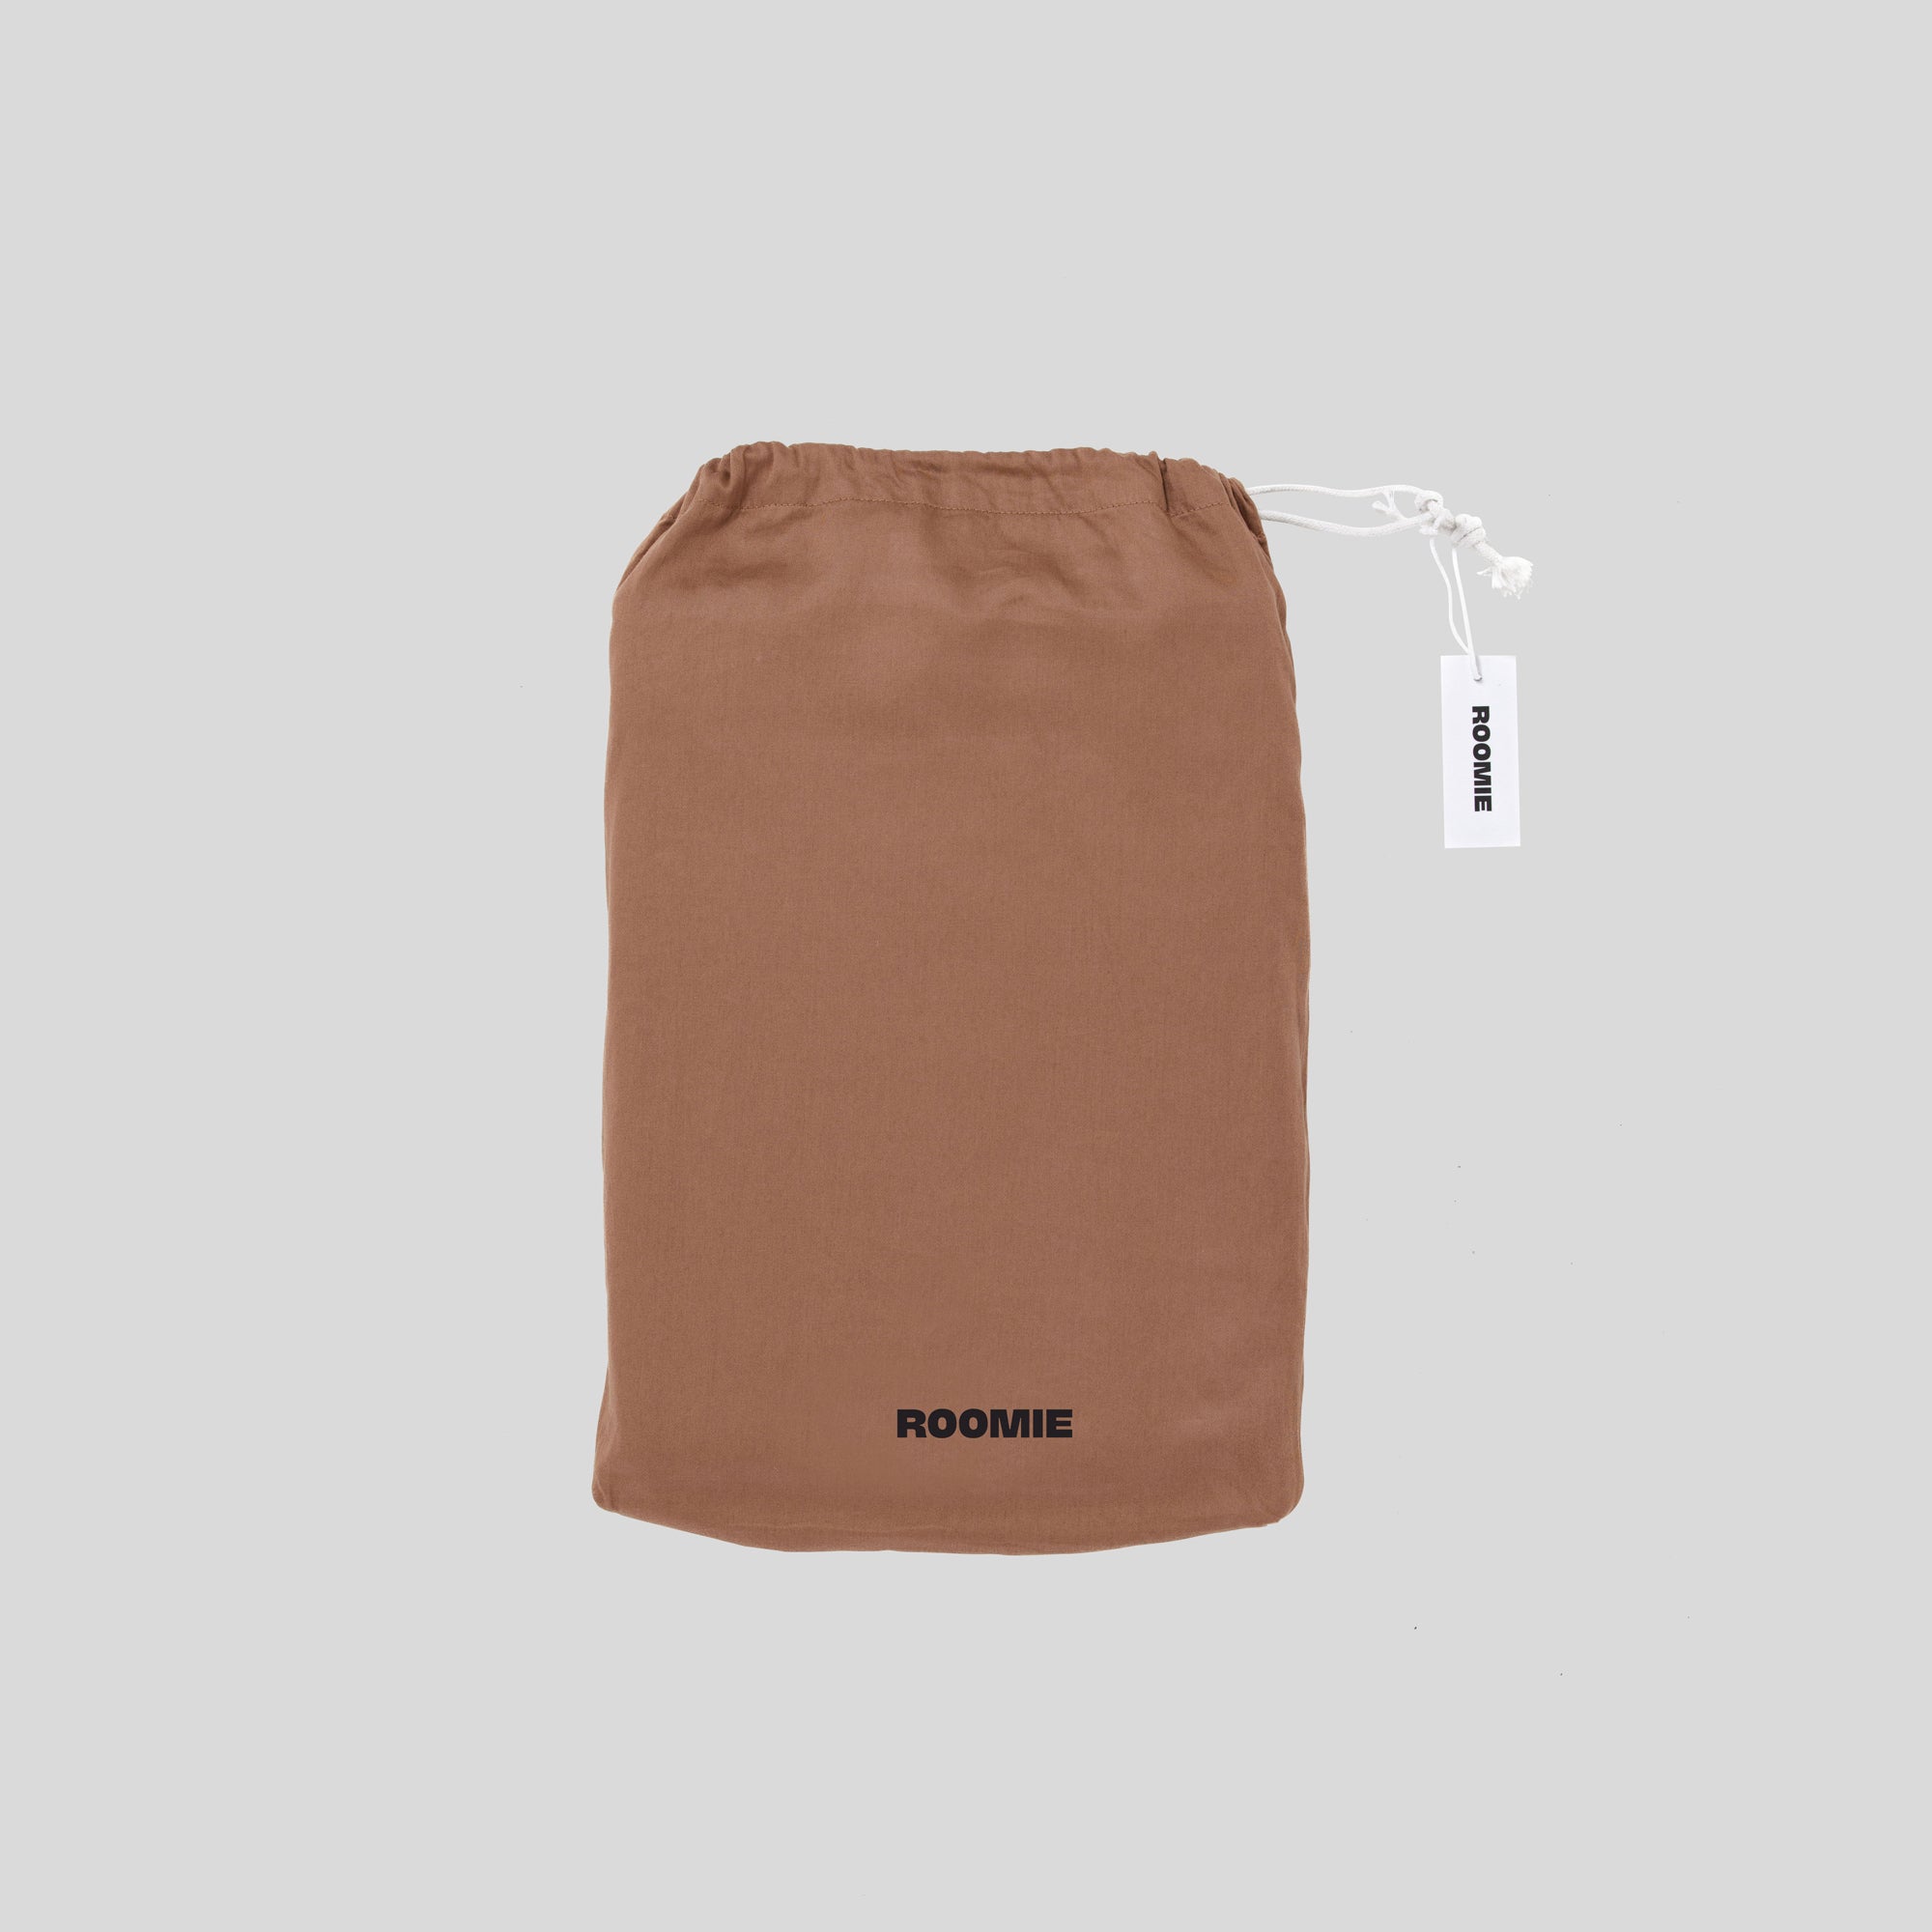 Roomie brown organic cotton fitted sheet bag